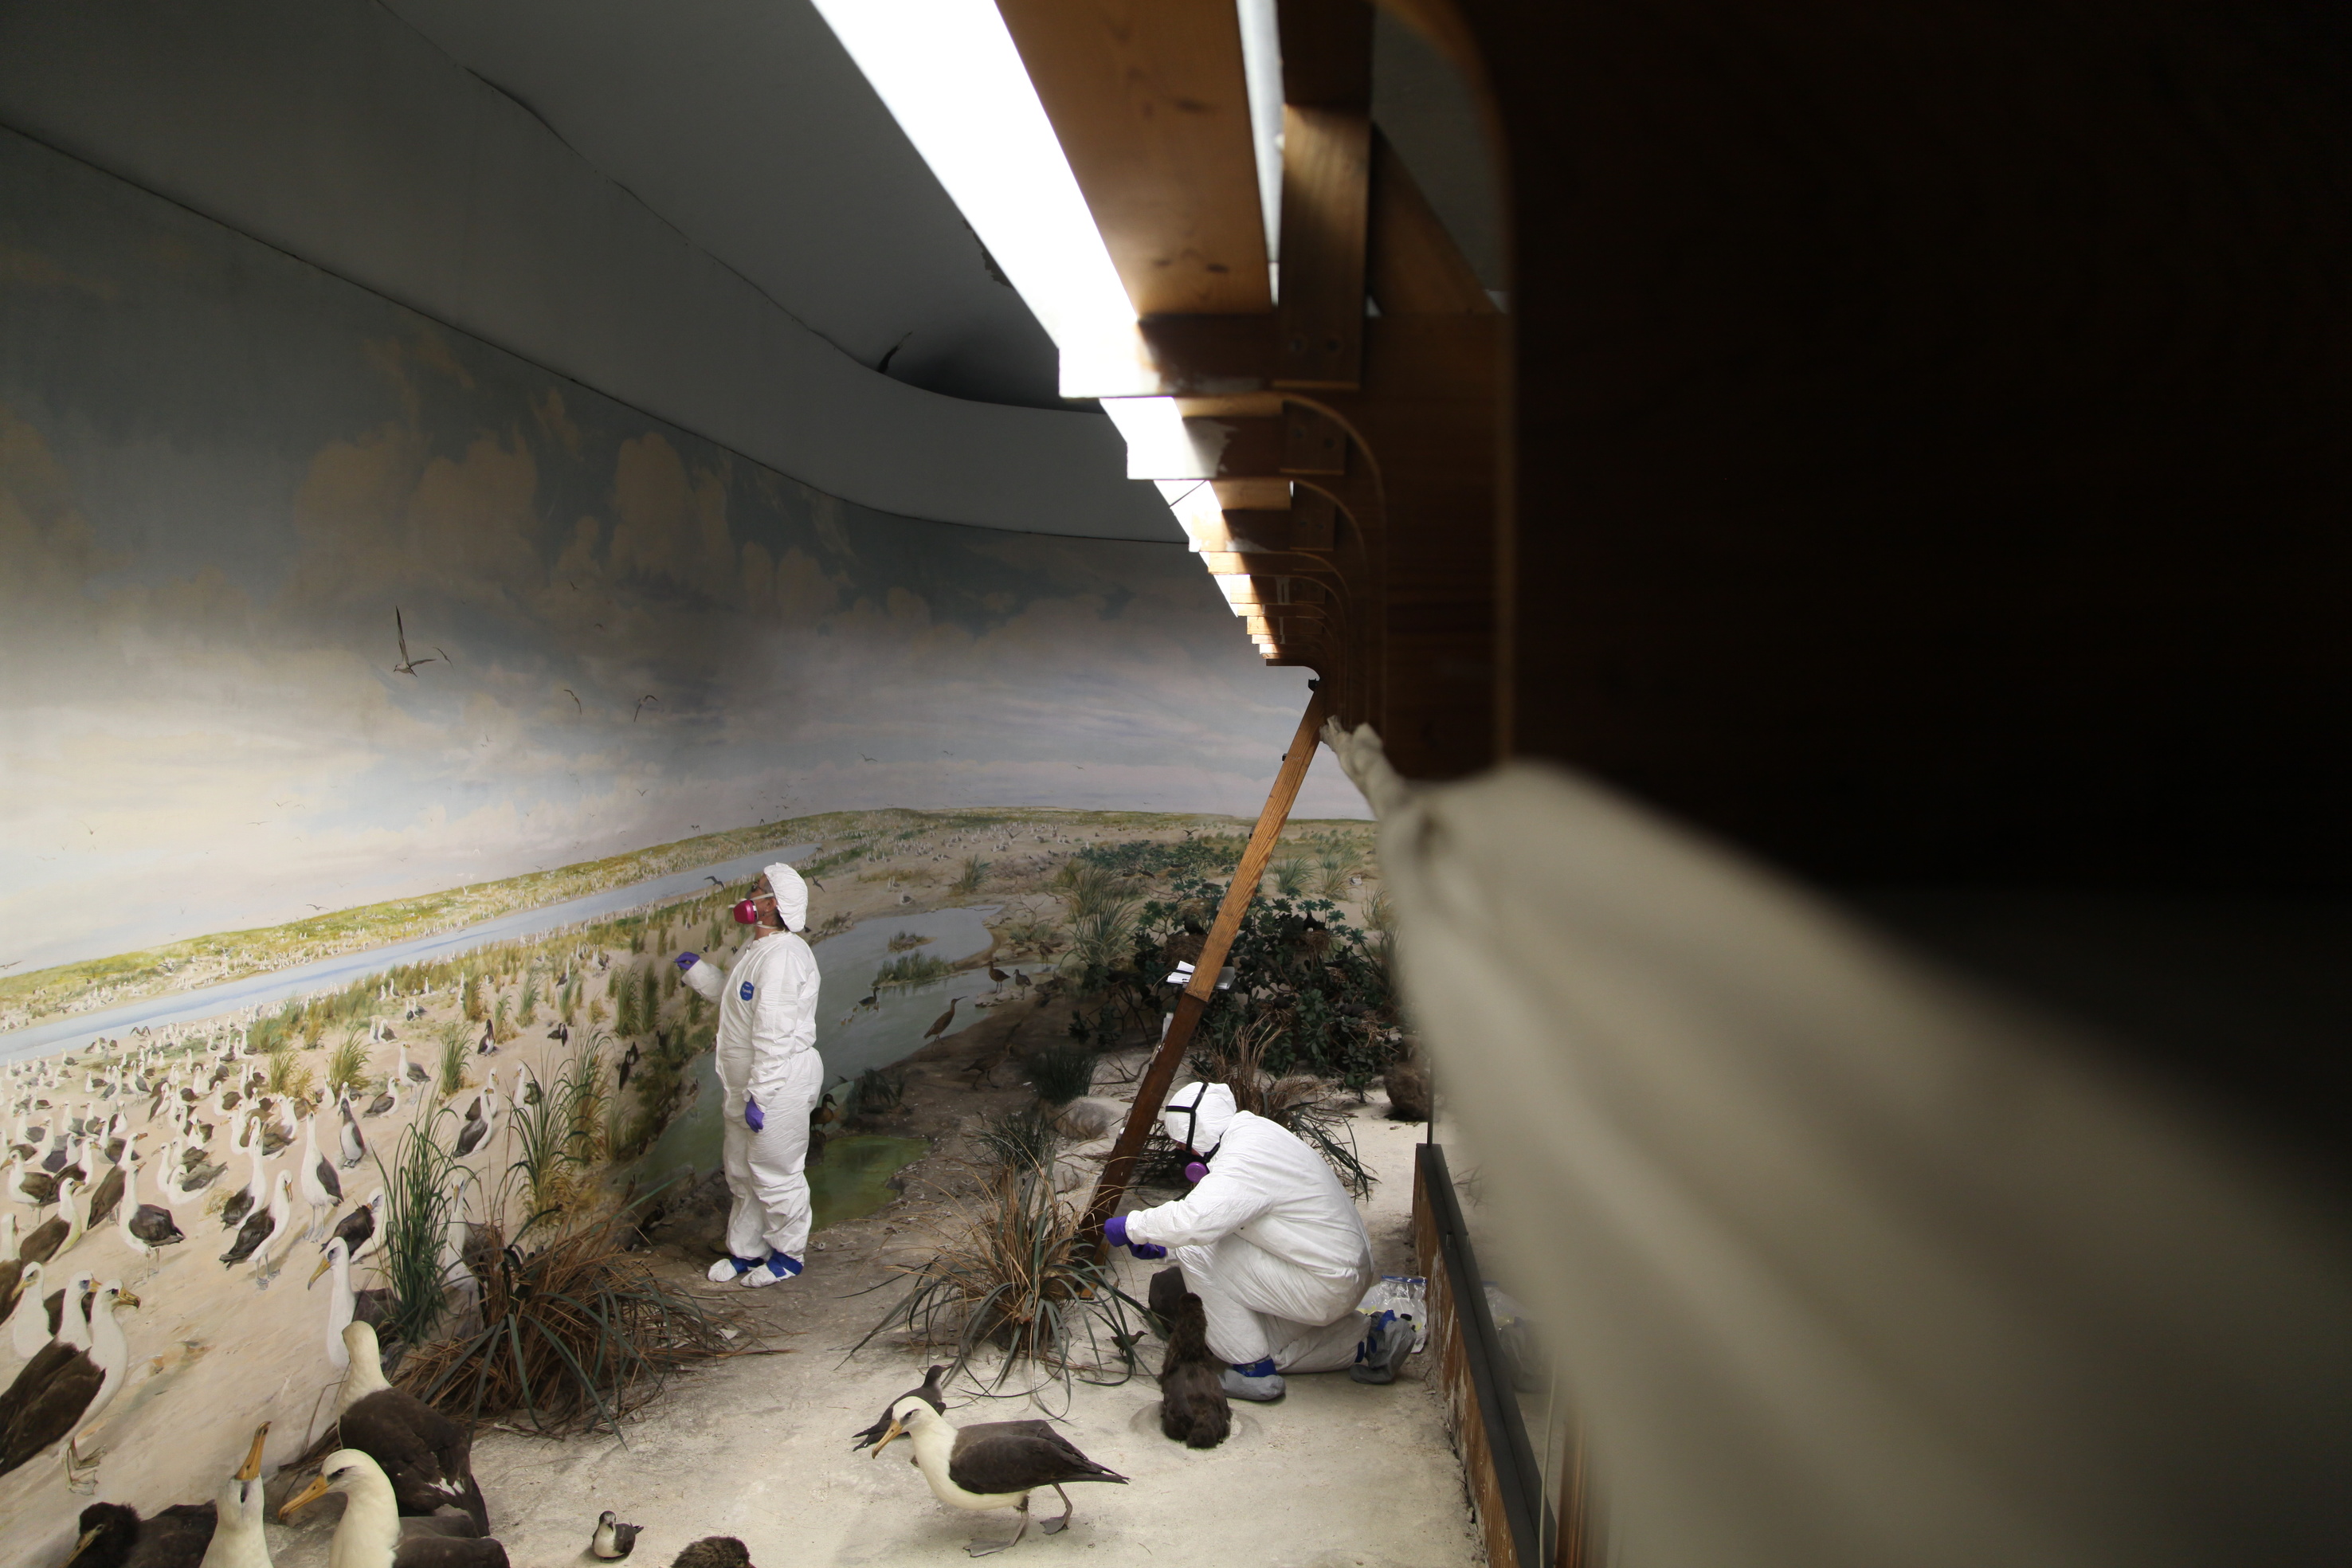 Conservators examine mural and foreground in Laysan Island Cyclorama for conservation assessment